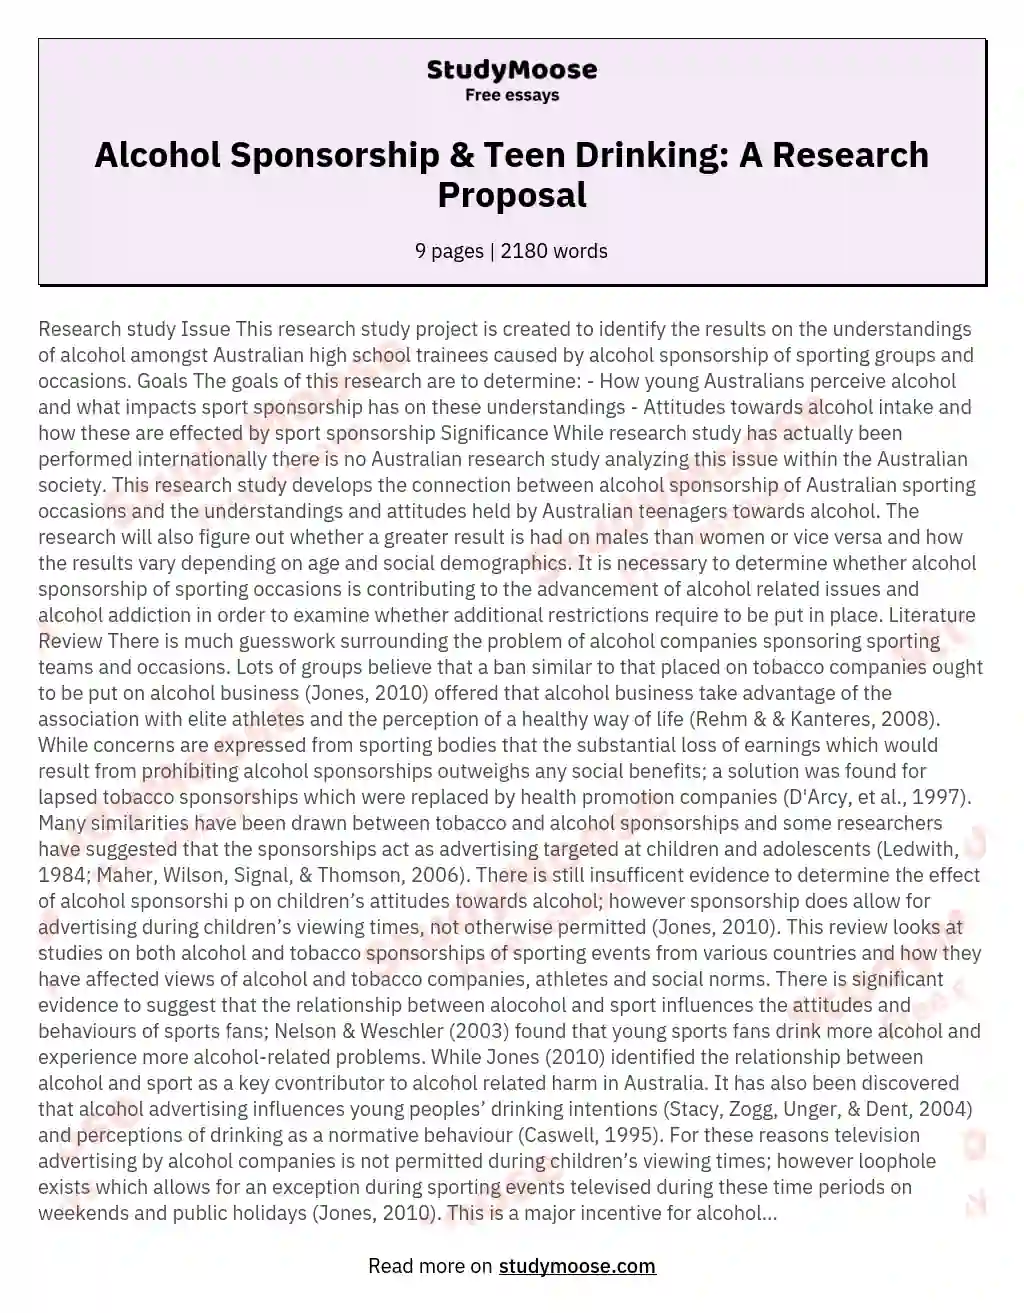 The Impact of Alcohol Sponsorship of Sporting Events on Consumption of Alcohol Amongst High School Students: a Research Proposal